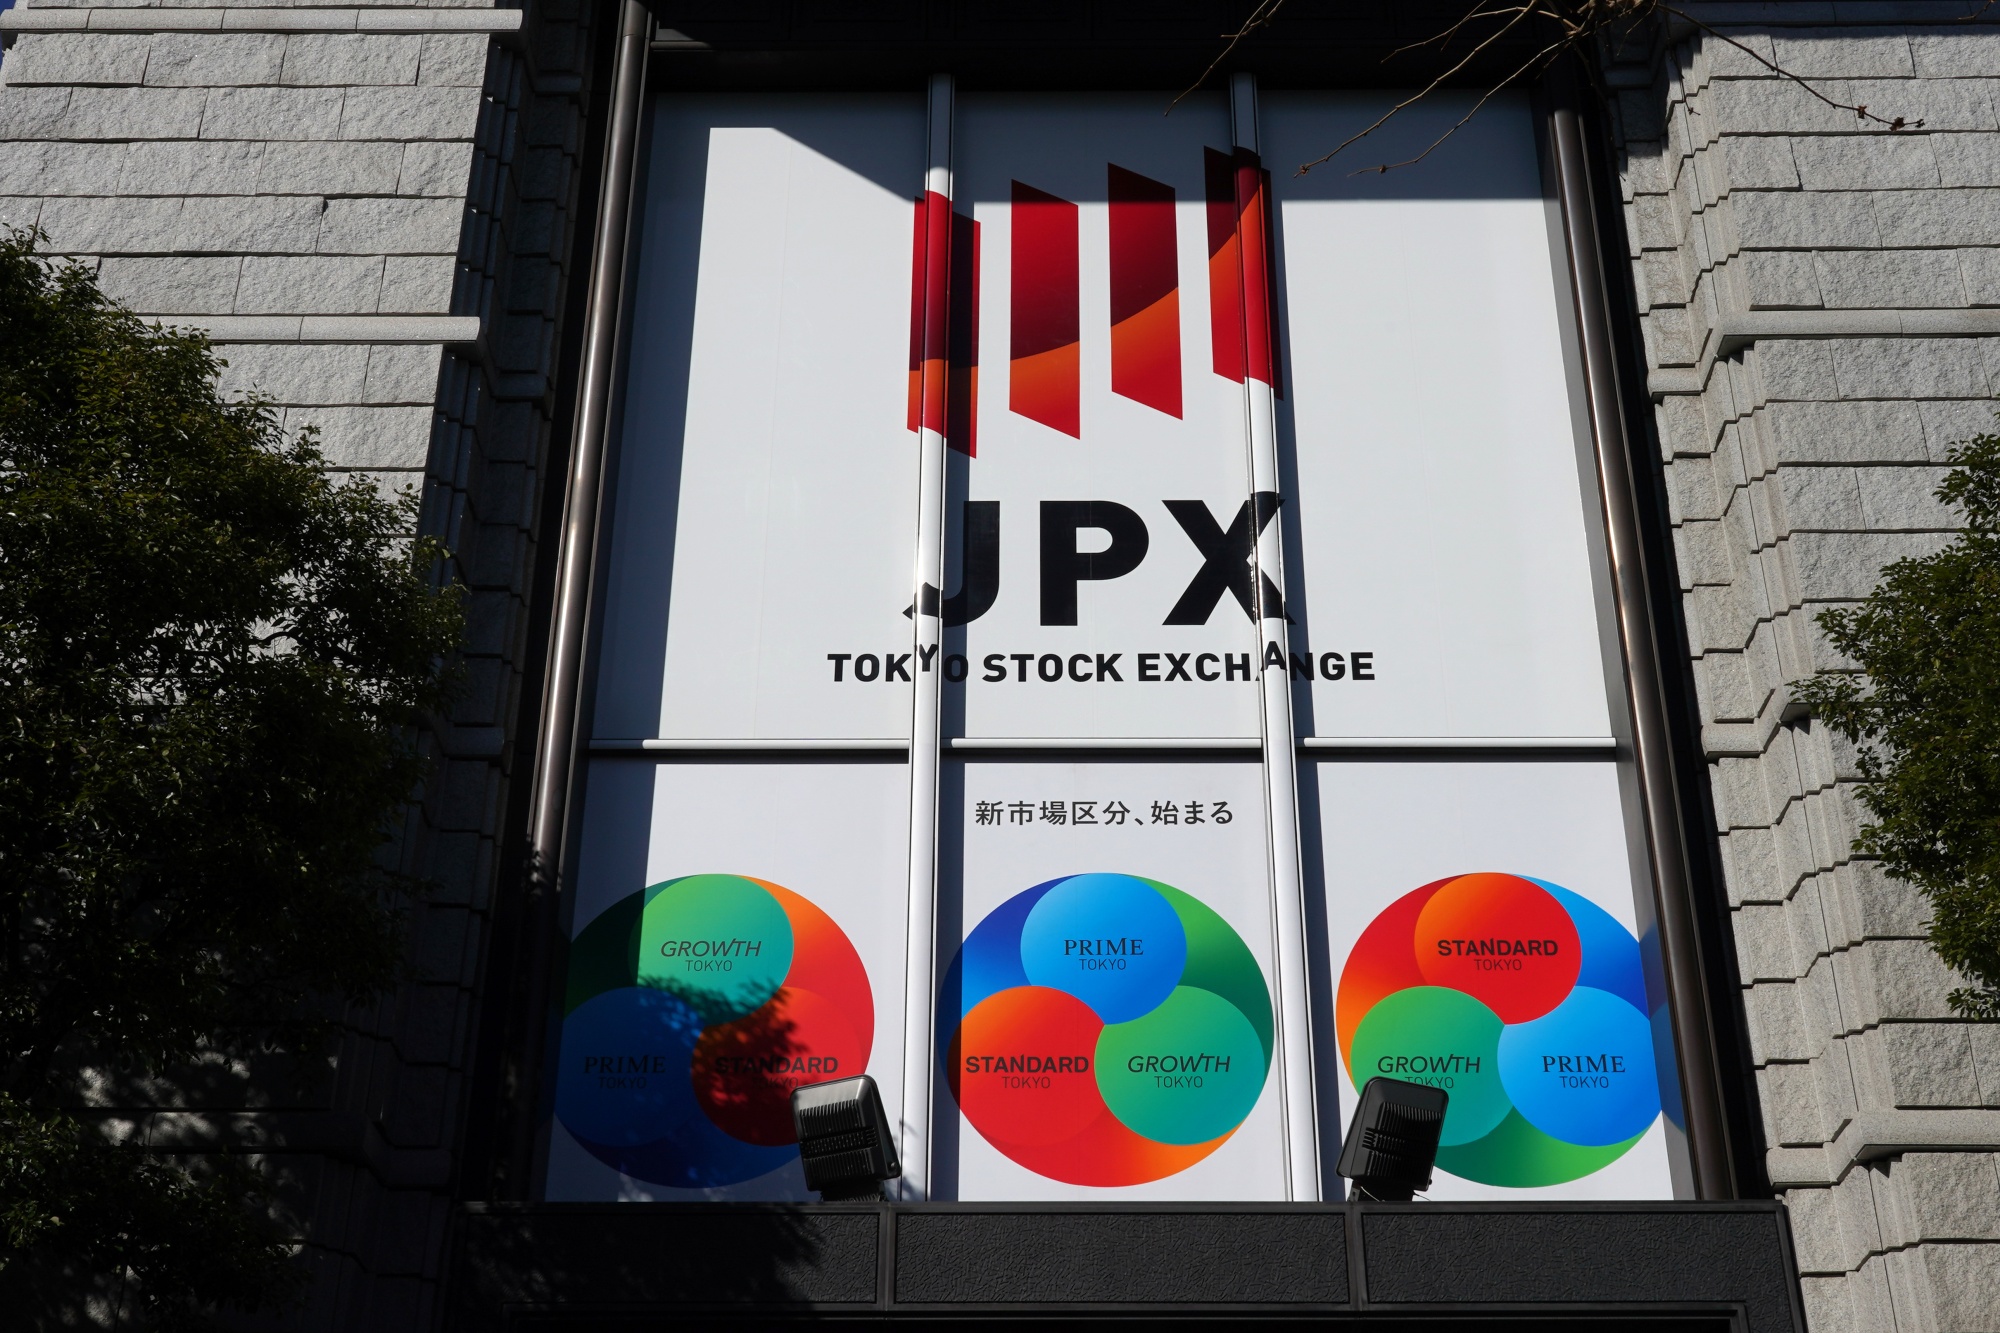 Japan Exchange Group Announces New Capitalism IPO Initiative - Bloomberg